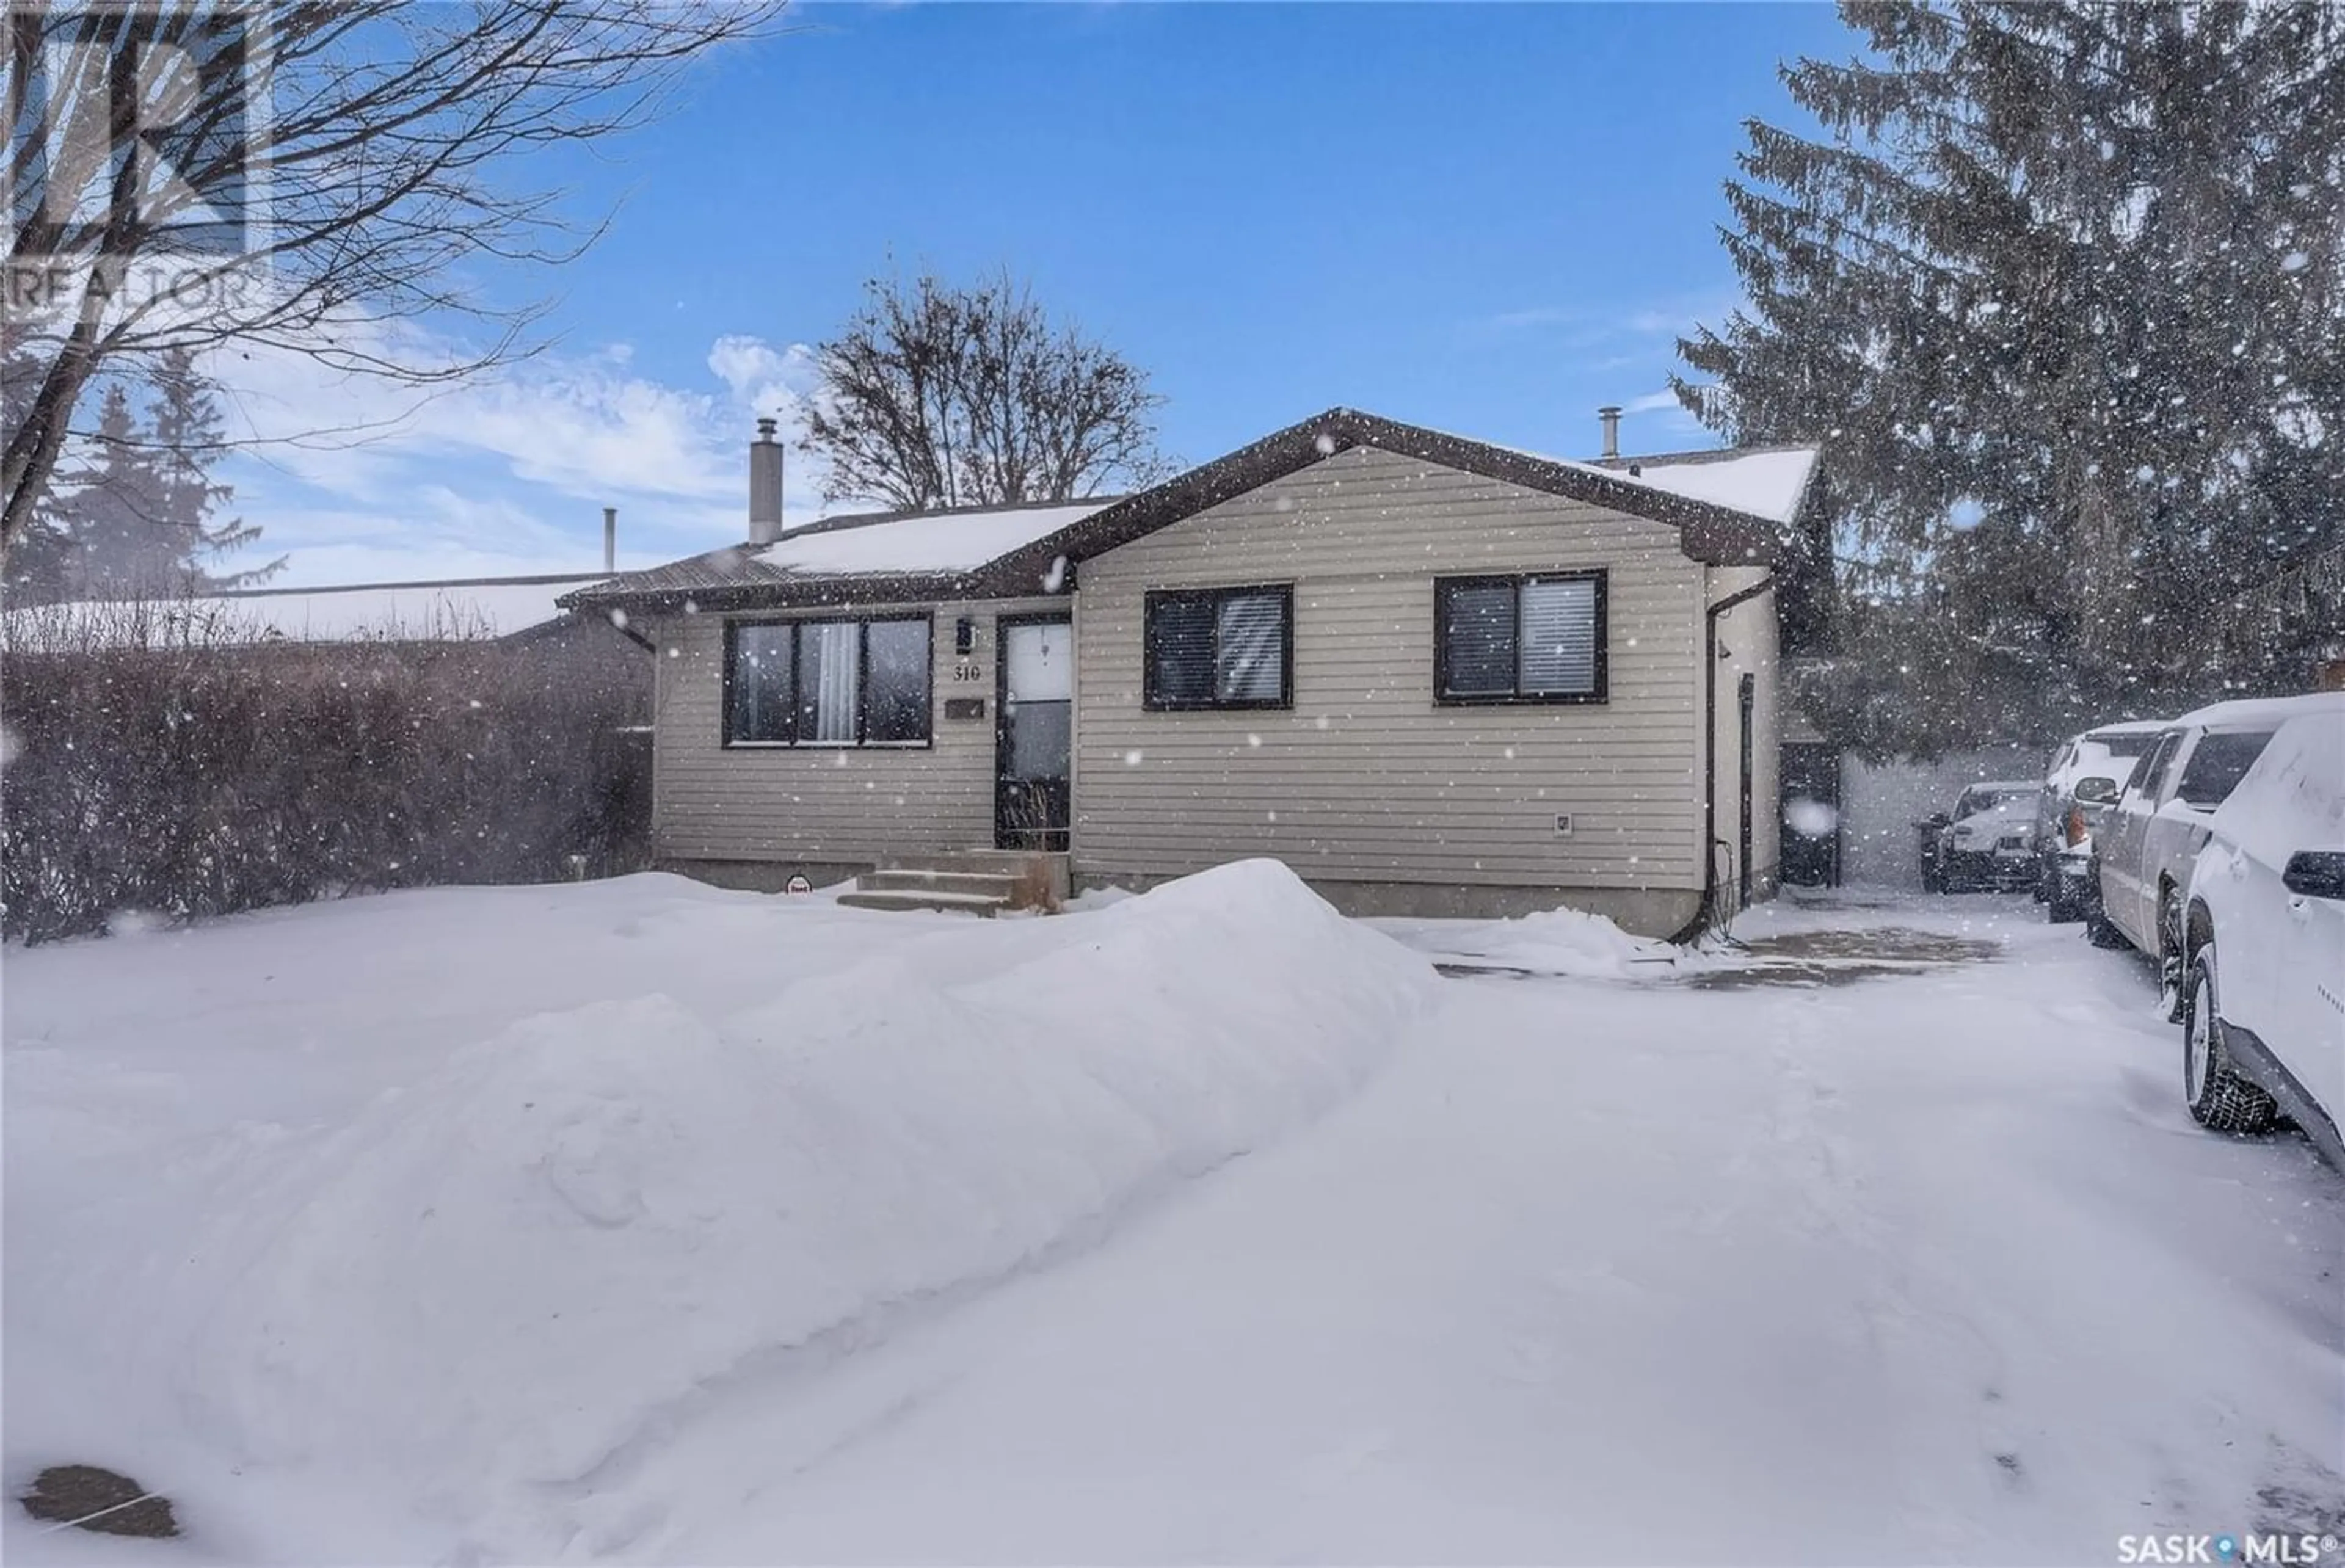 Home with unknown exterior material for 310 Dickey CRESCENT, Saskatoon Saskatchewan S7L5P1